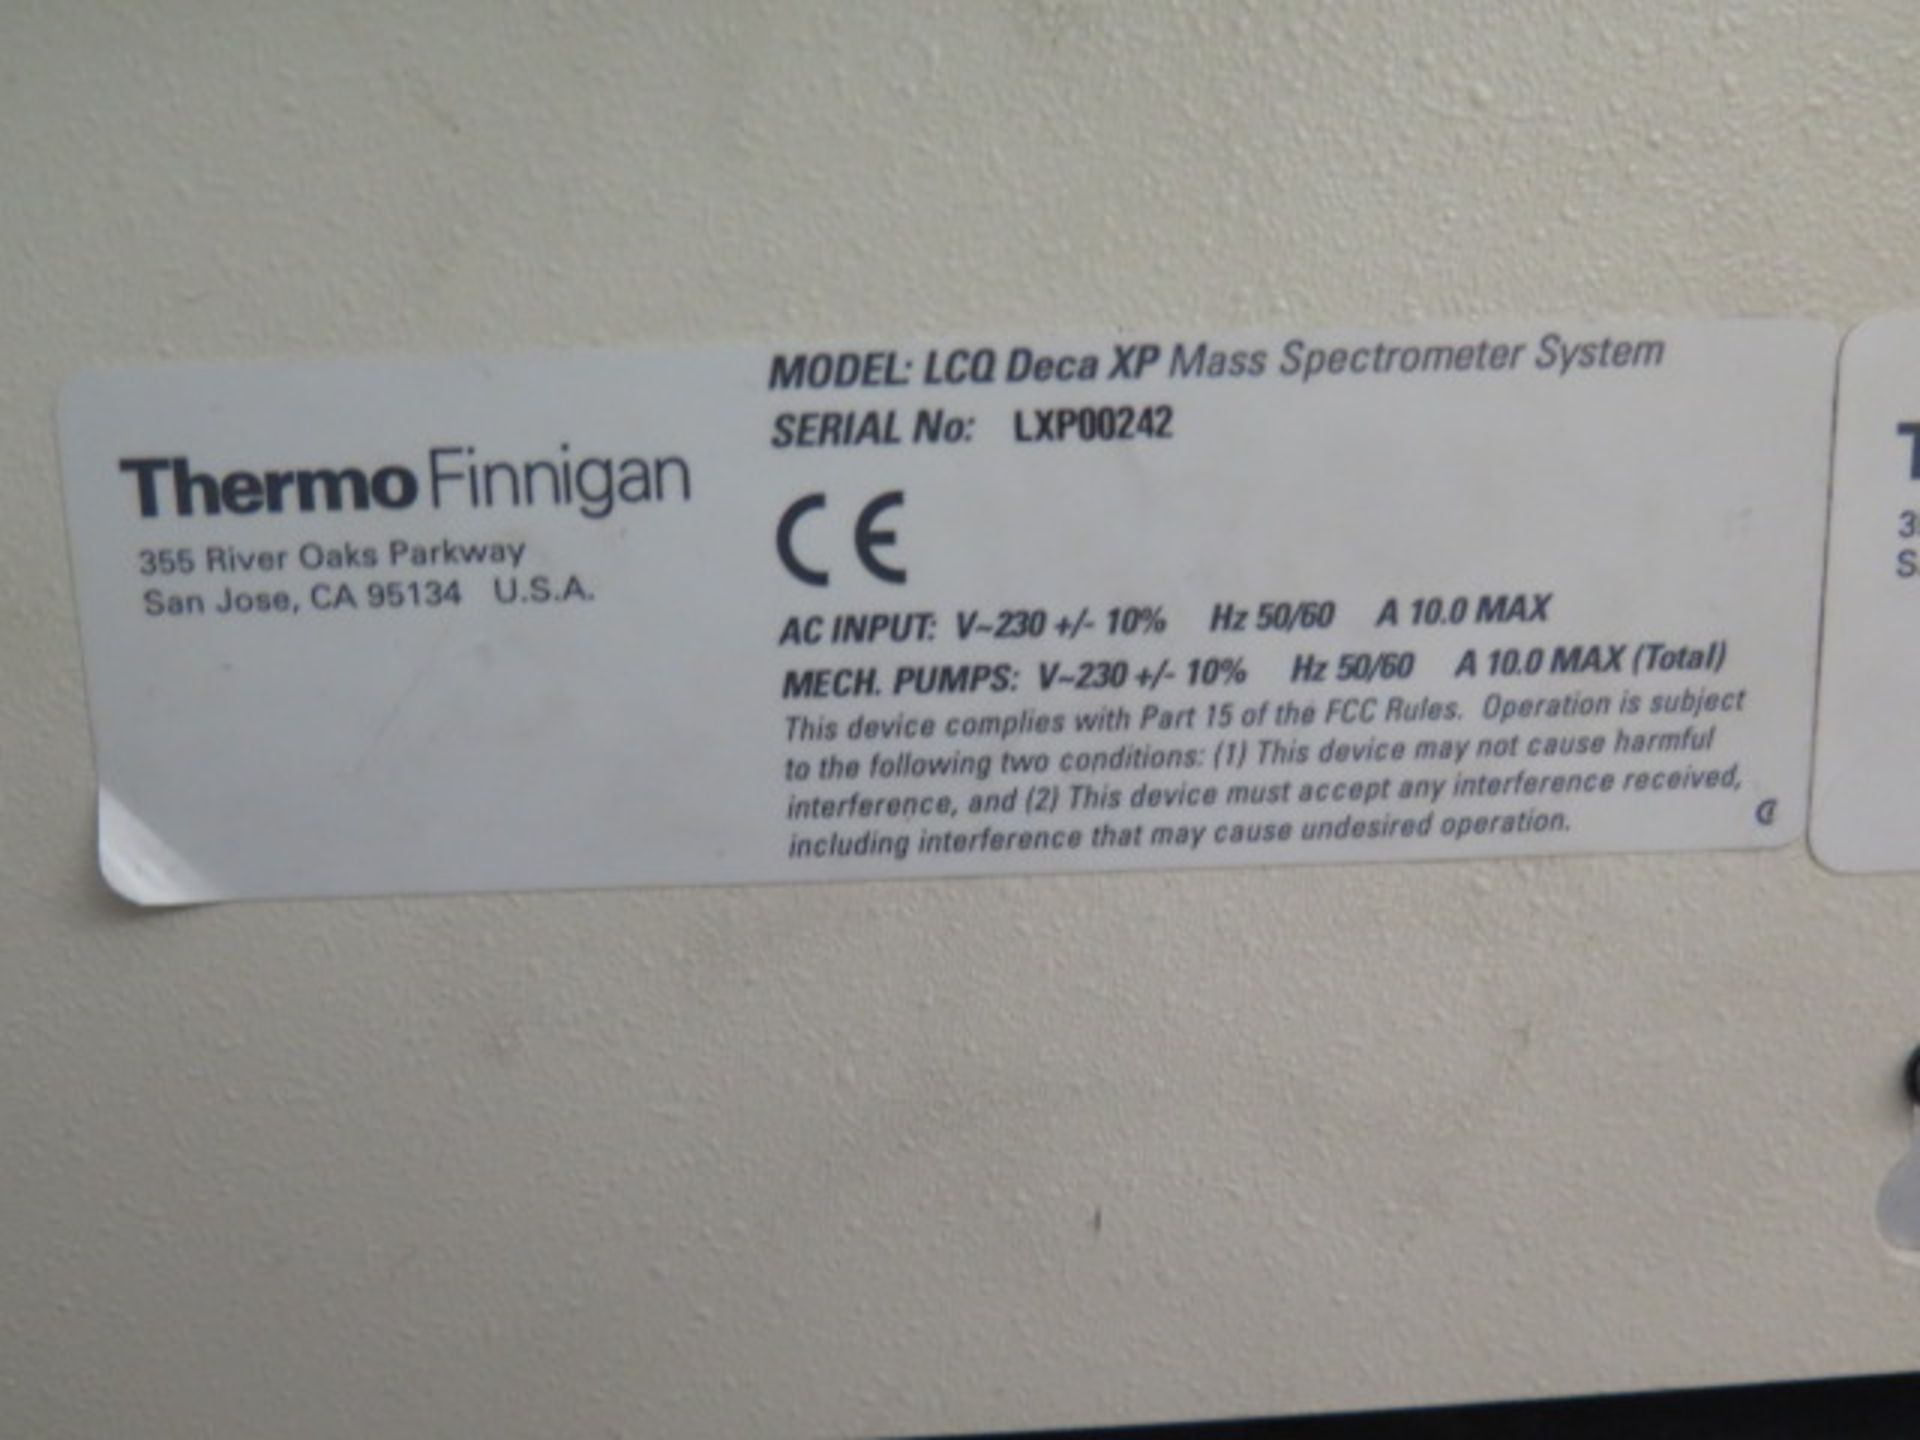 Thermo Finnigan LCQ DECA XP Mass Spectrometer System (SOLD AS-IS - NO WARRANTY) - Image 12 of 14